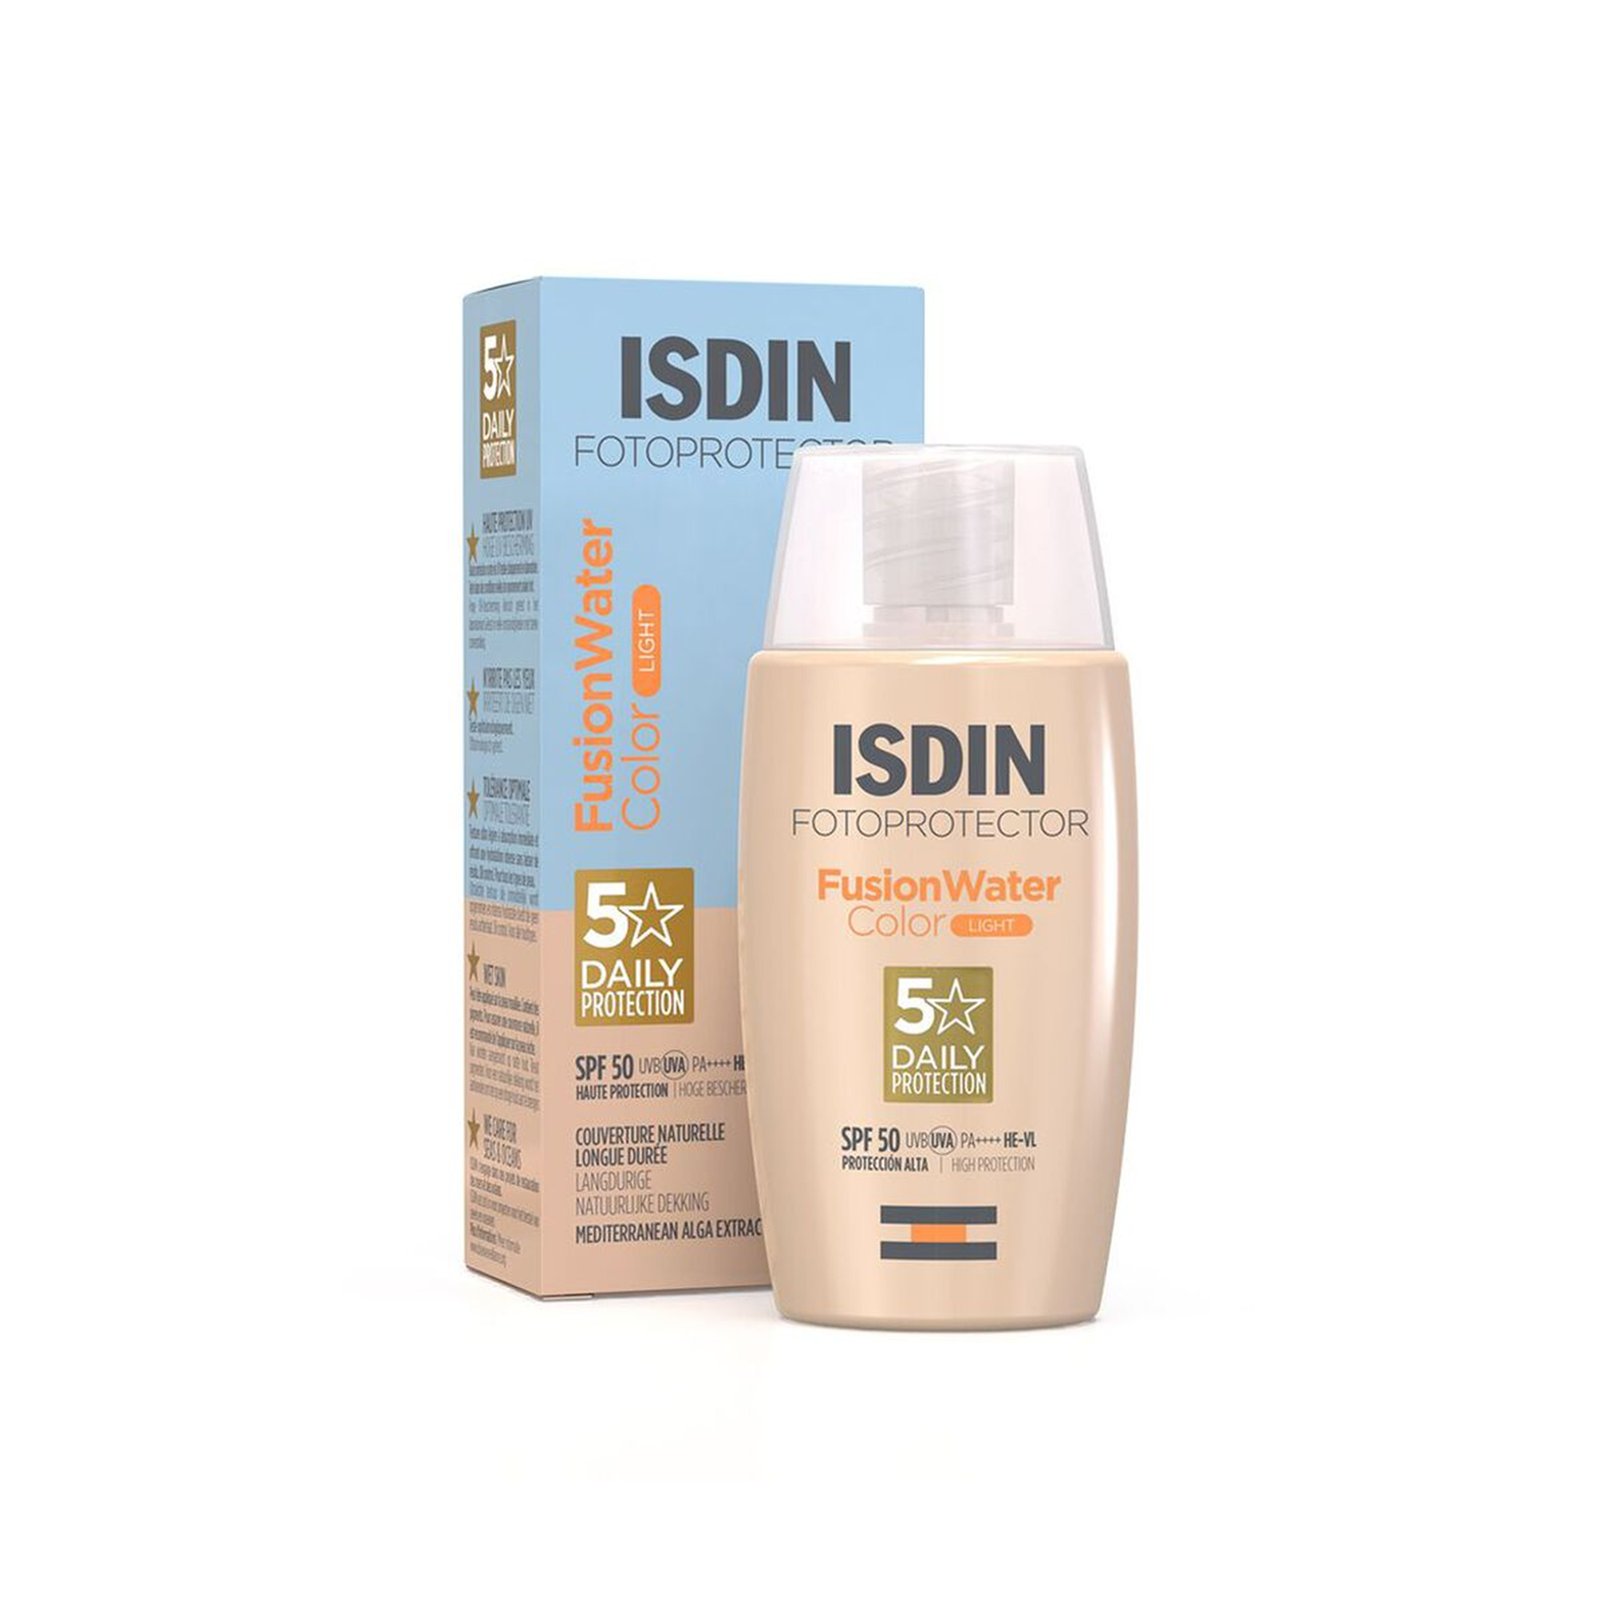 ISDIN Fotoprotector Fusion Water Color Light SPF50 50ml (1.69floz)